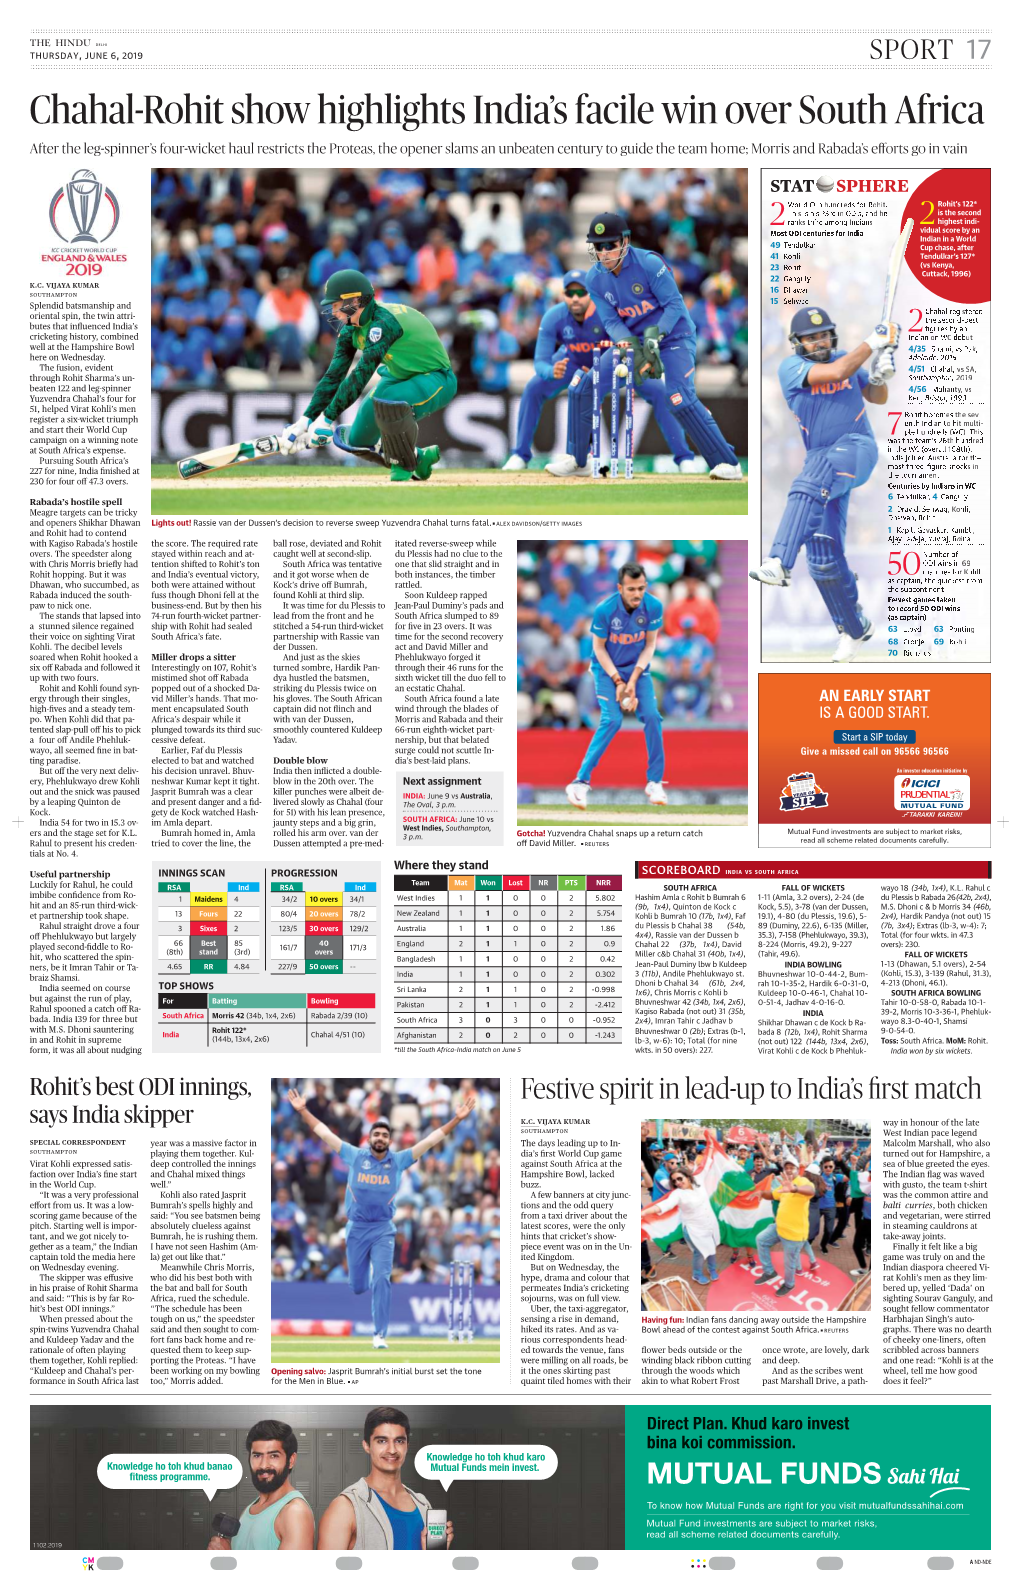 Chahal-Rohit Show Highlights India's Facile Win Over South Africa